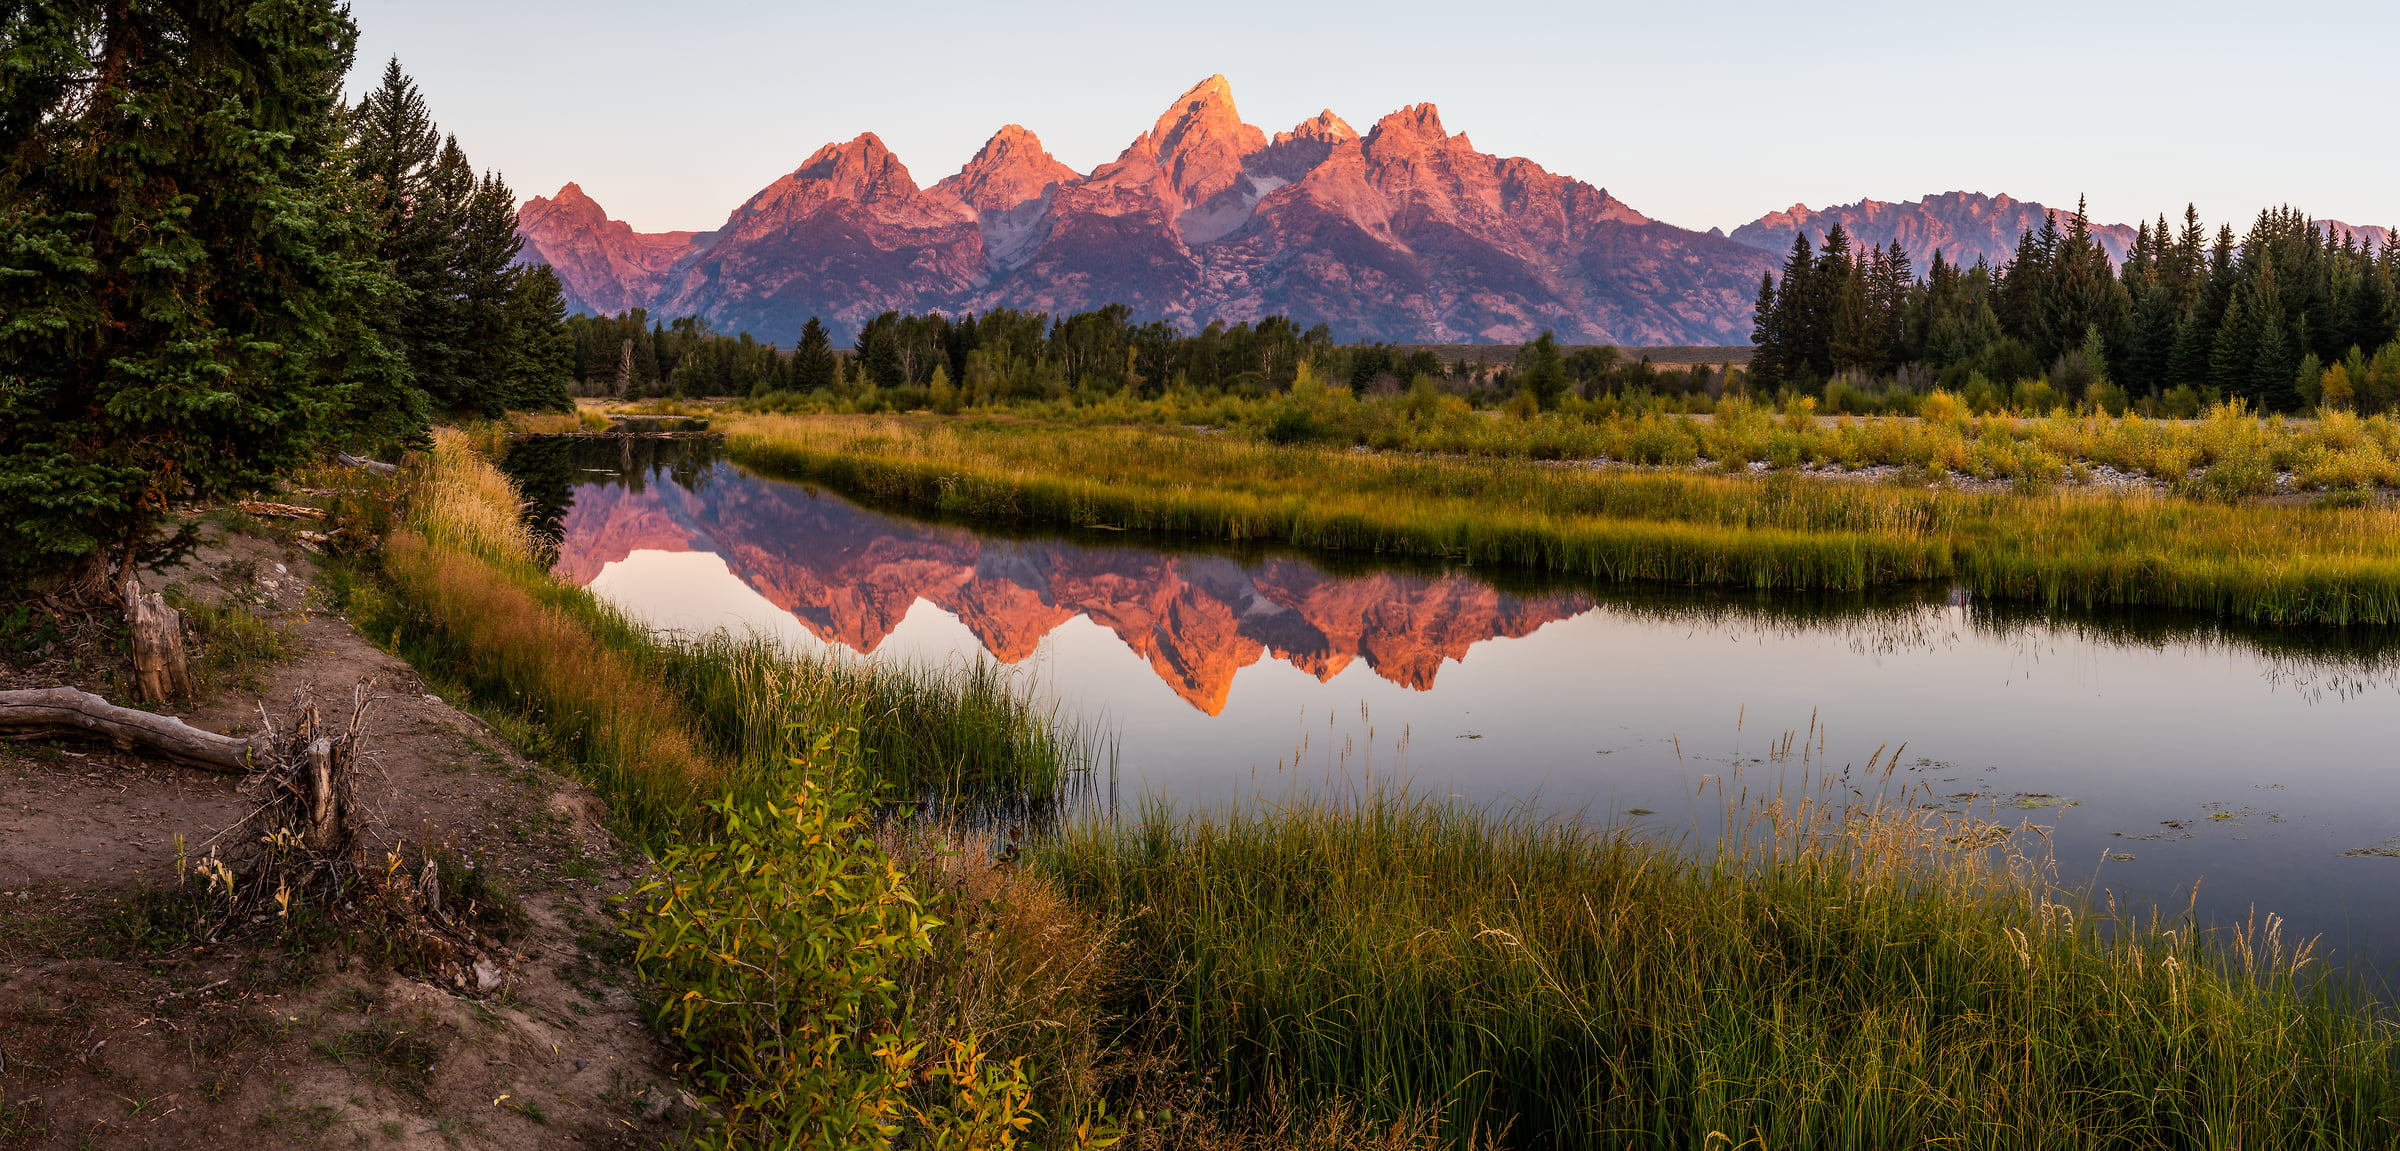 121 megapixels! A very high resolution, large-format VAST photo print of a landscape with mountains and a river; photograph created by Phillip Noll in Grand Teton National Park, Wyoming.